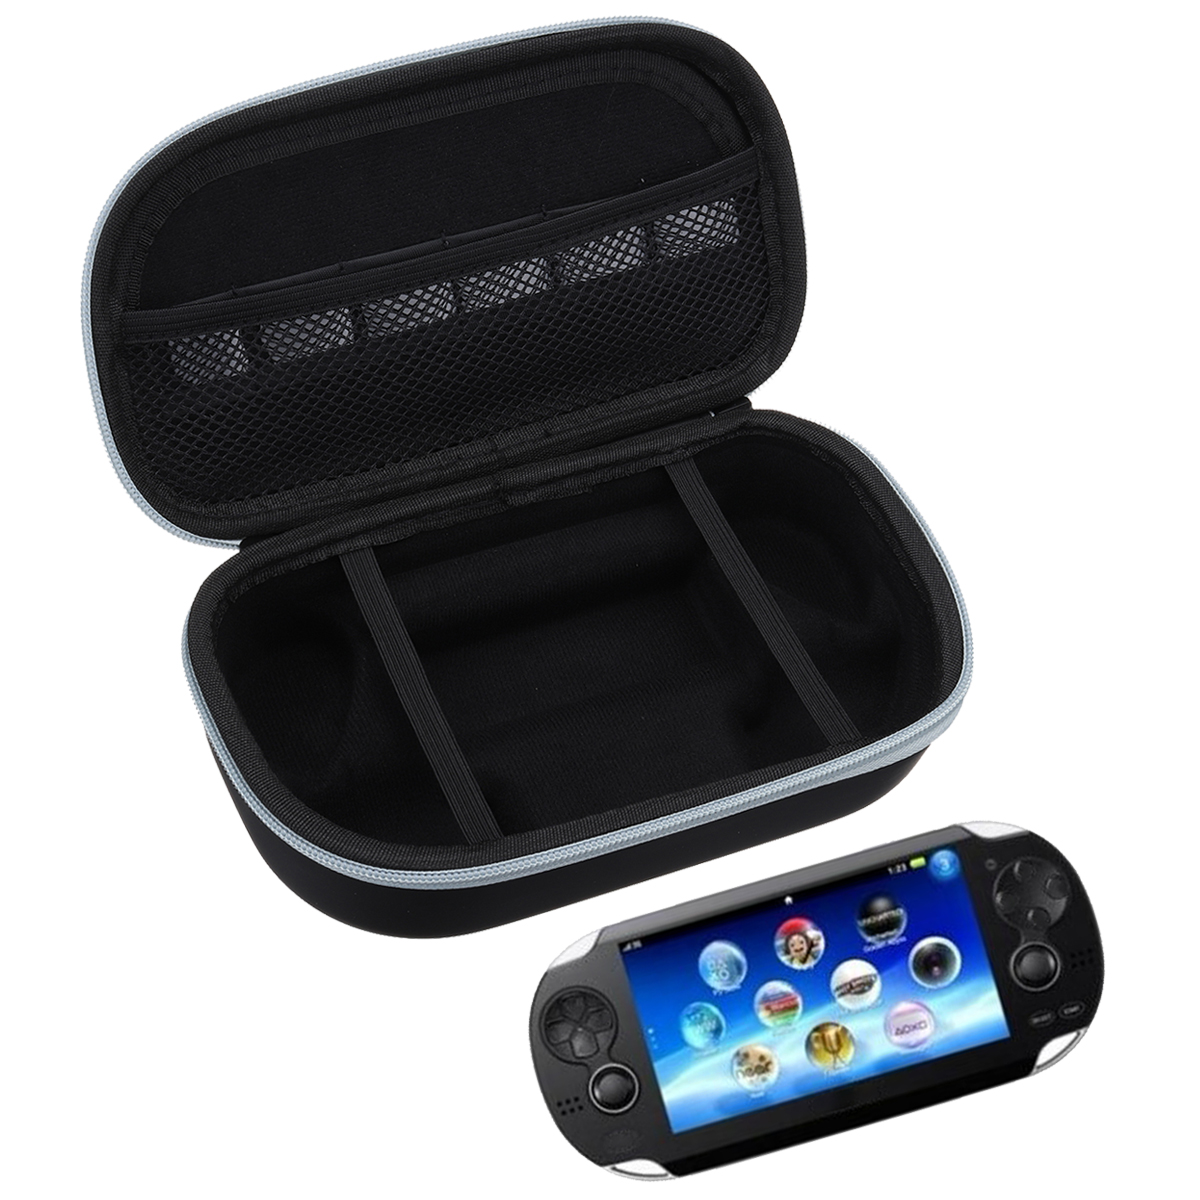 Portable-Storage-Case-EVA-Black-Hard-Cover-Protective-Carry-Case-for-psv1000-2000-Console-1974705-12